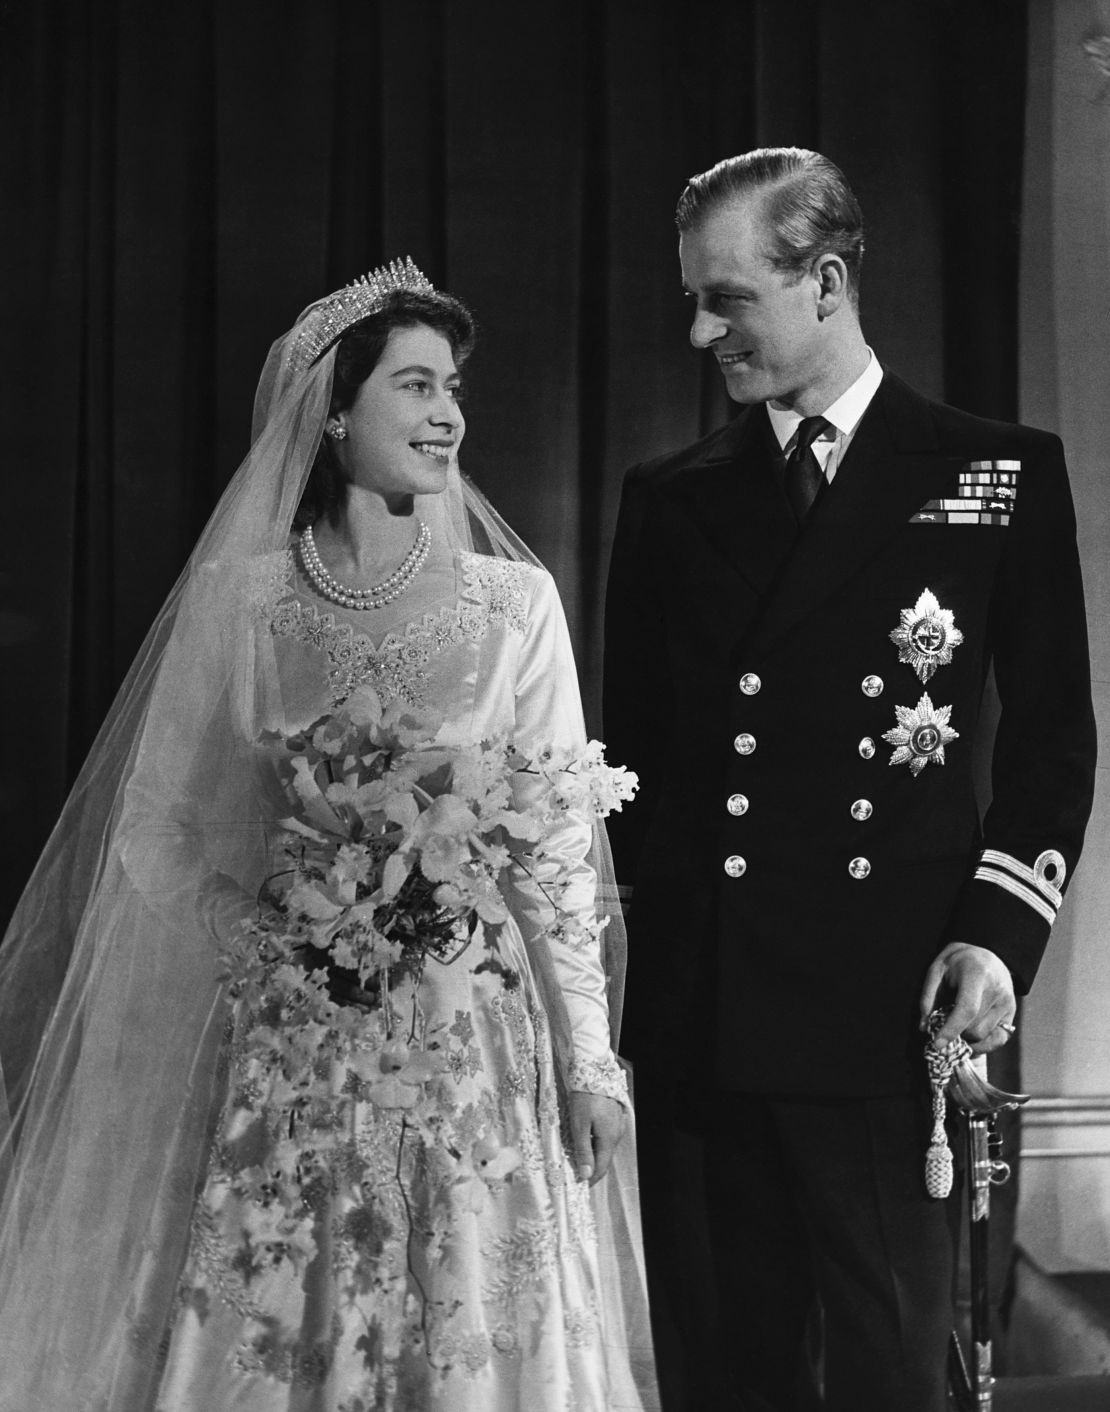 By the time Princess Elizabeth, later Queen Elizabeth II, married Phillip, Duke of Edinburgh in 1947, the white wedding dress was an international norm.